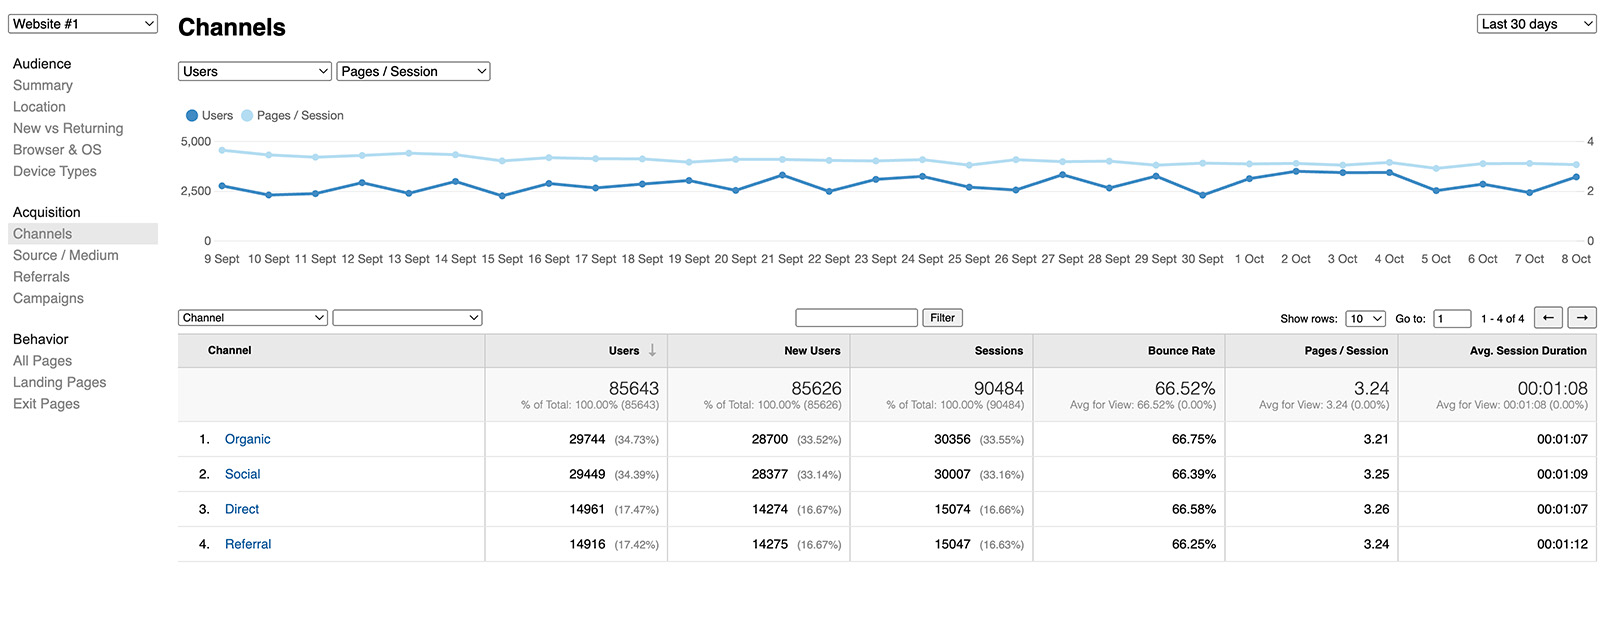 Web log analytics showing channels report